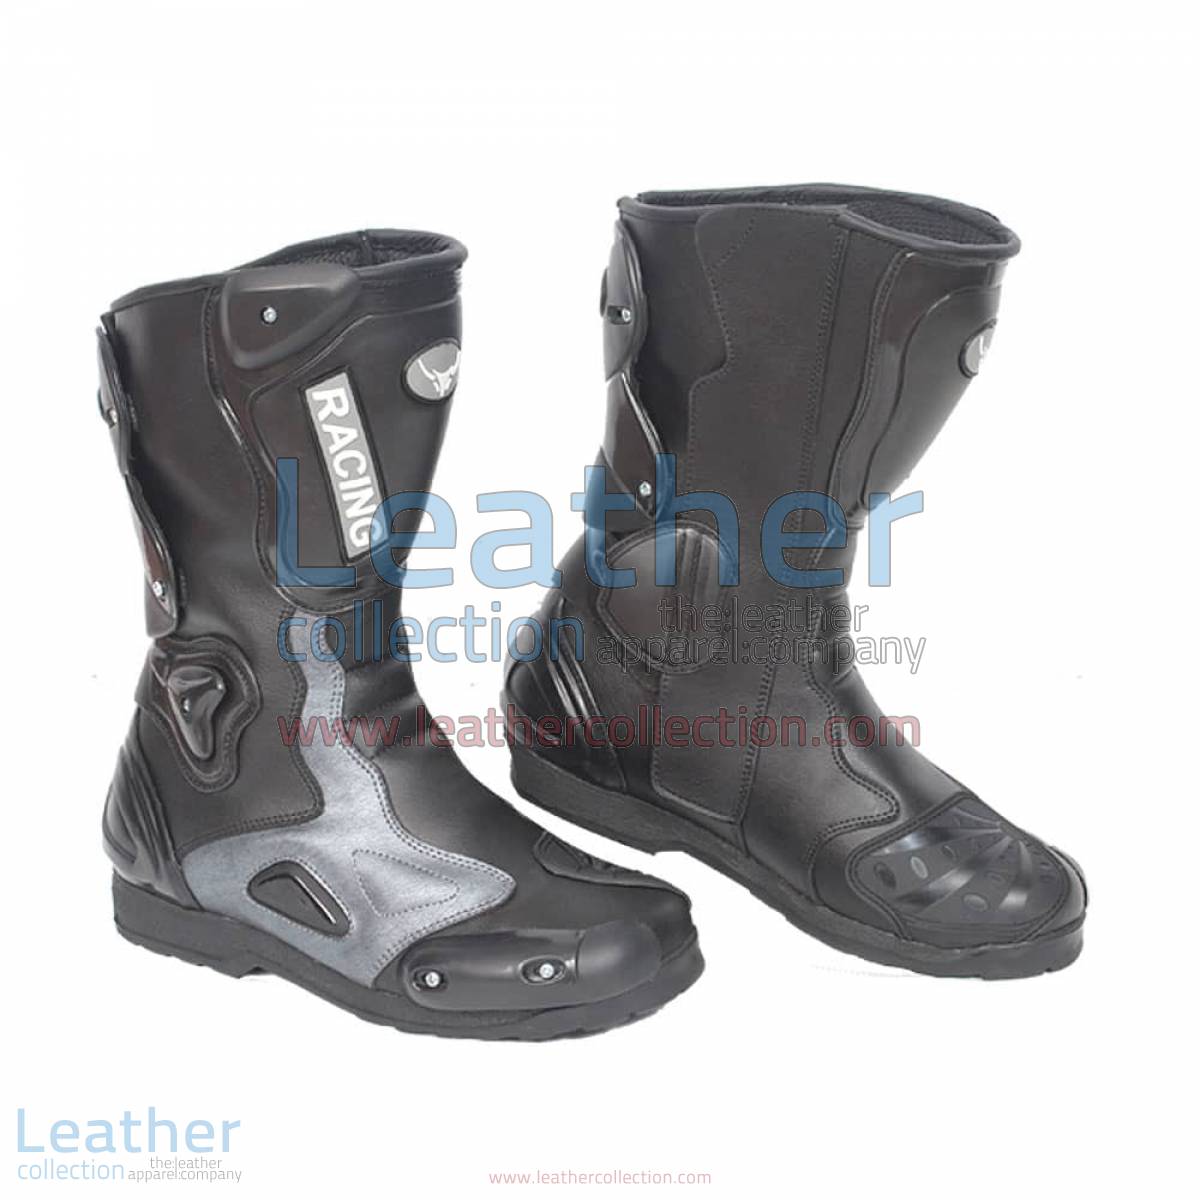 Alpha Moto Racing Boots | racing boots,moto racing boots